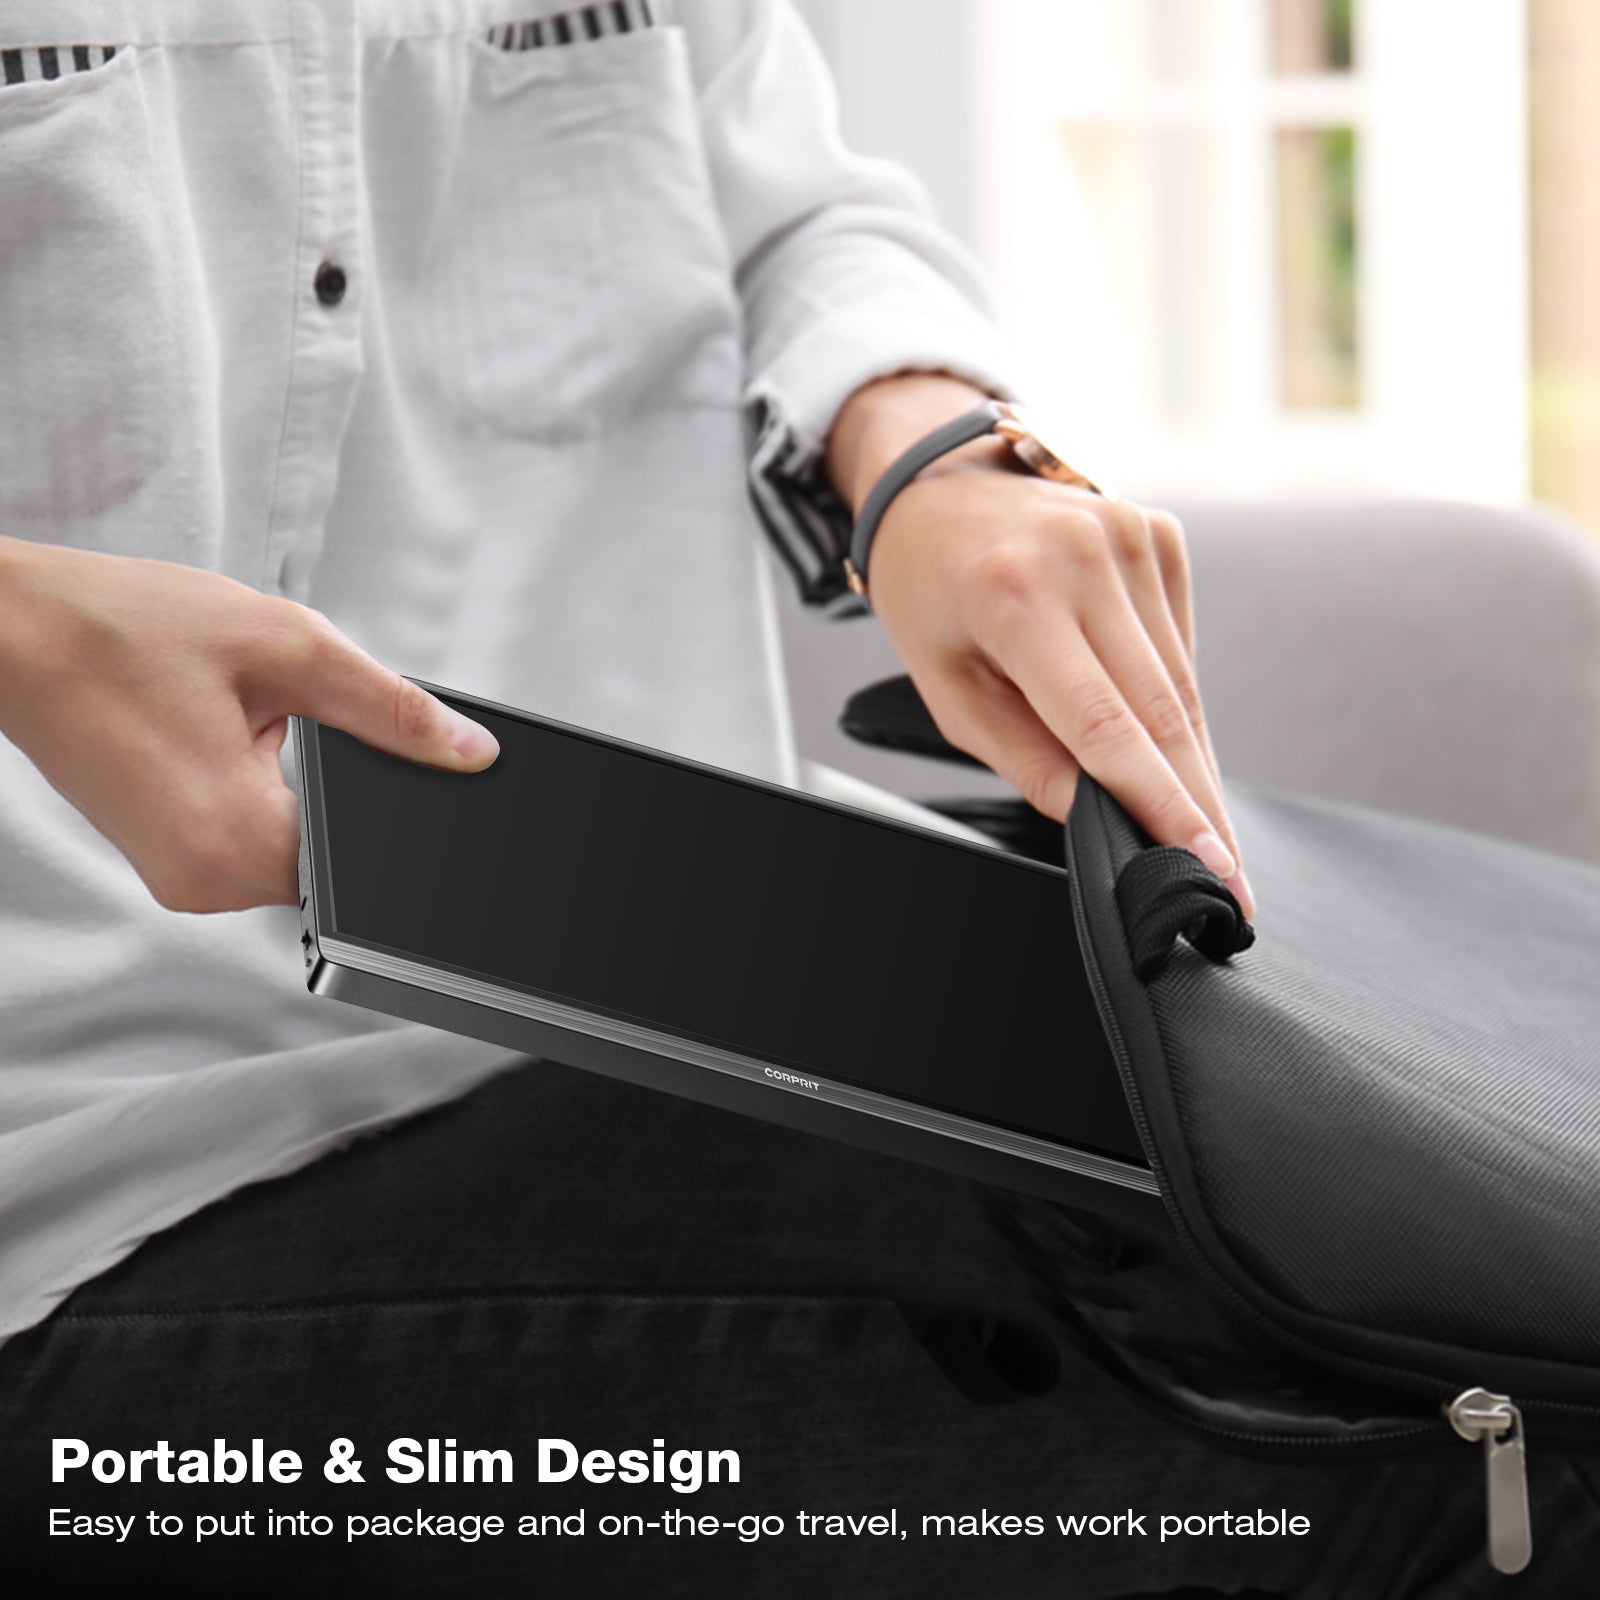 Portable Monitor, Corprit D153 15.6" 1080P 100% sRGB Portable USB C External Monitor (Out Of Stock In The US)